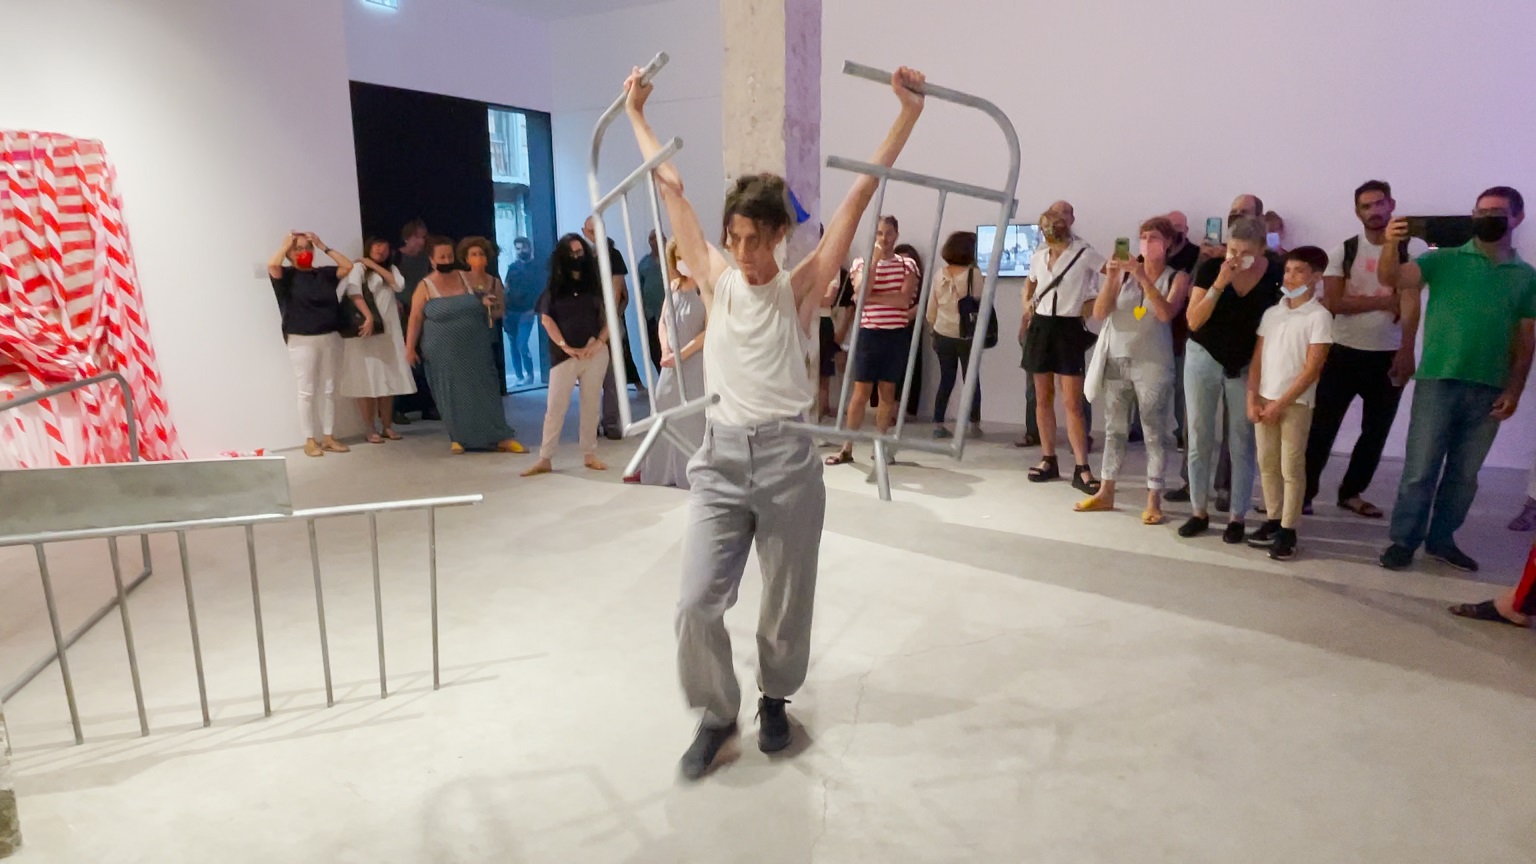 Opening night with performance by Iris Erez, July 8th, 2021